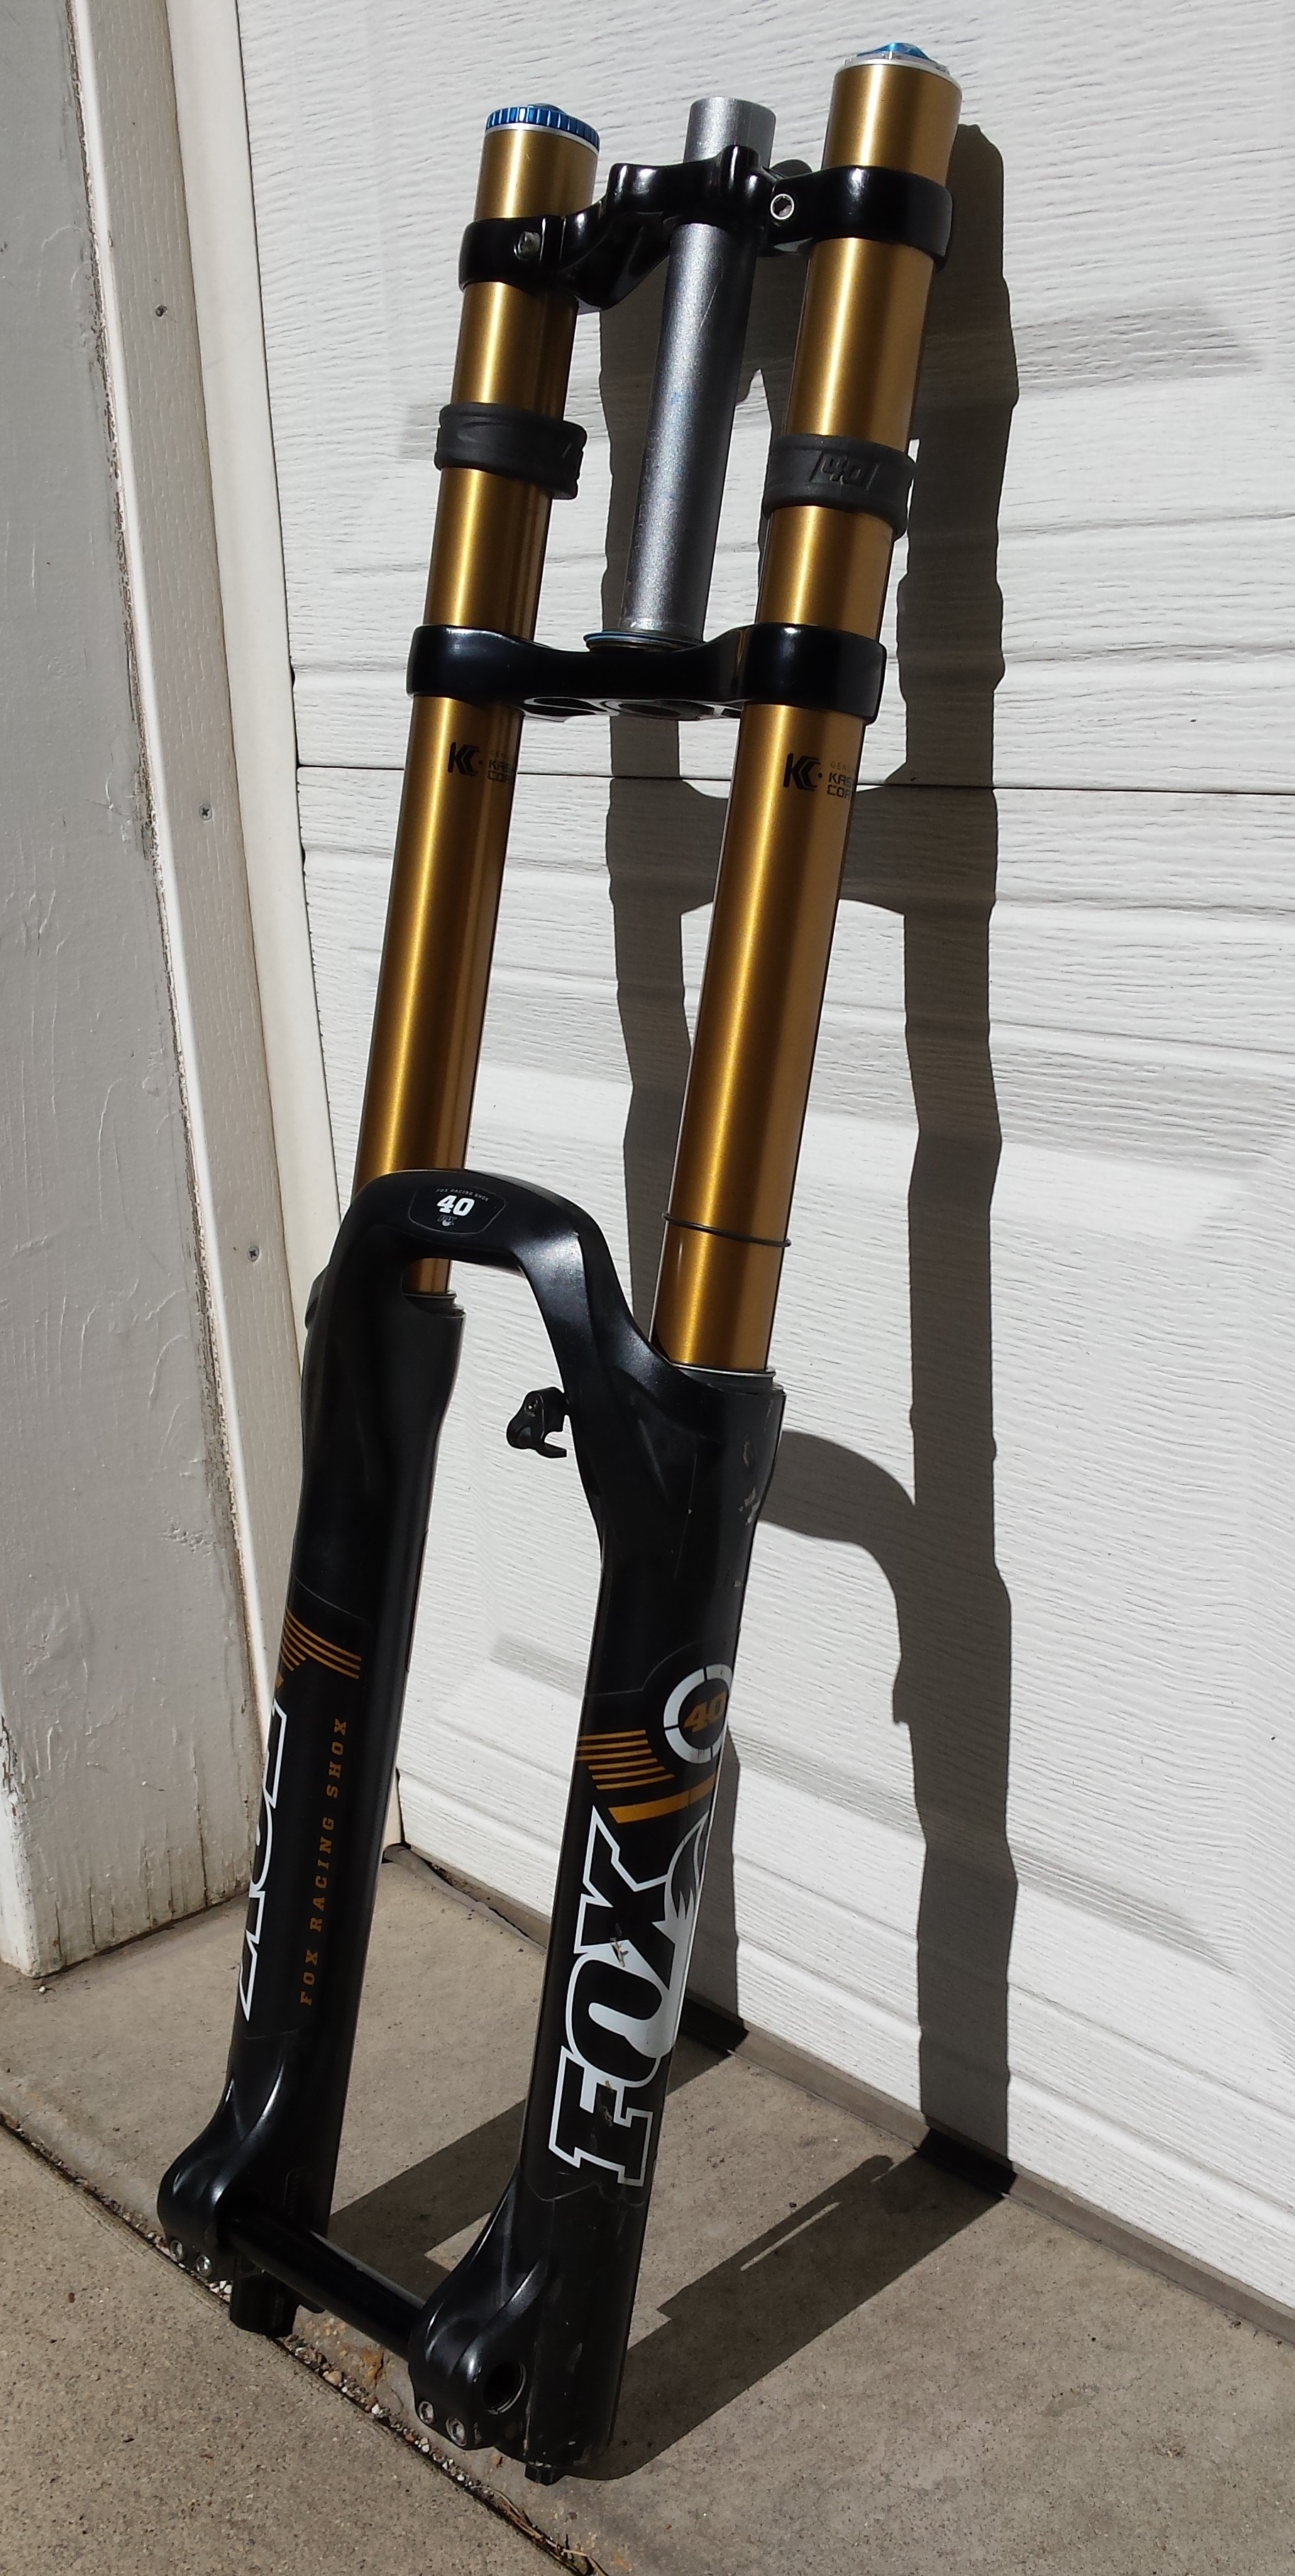 For Sale 700 Fox 40 Rc2 Fit Downhill Fork Ridemonkey Forums